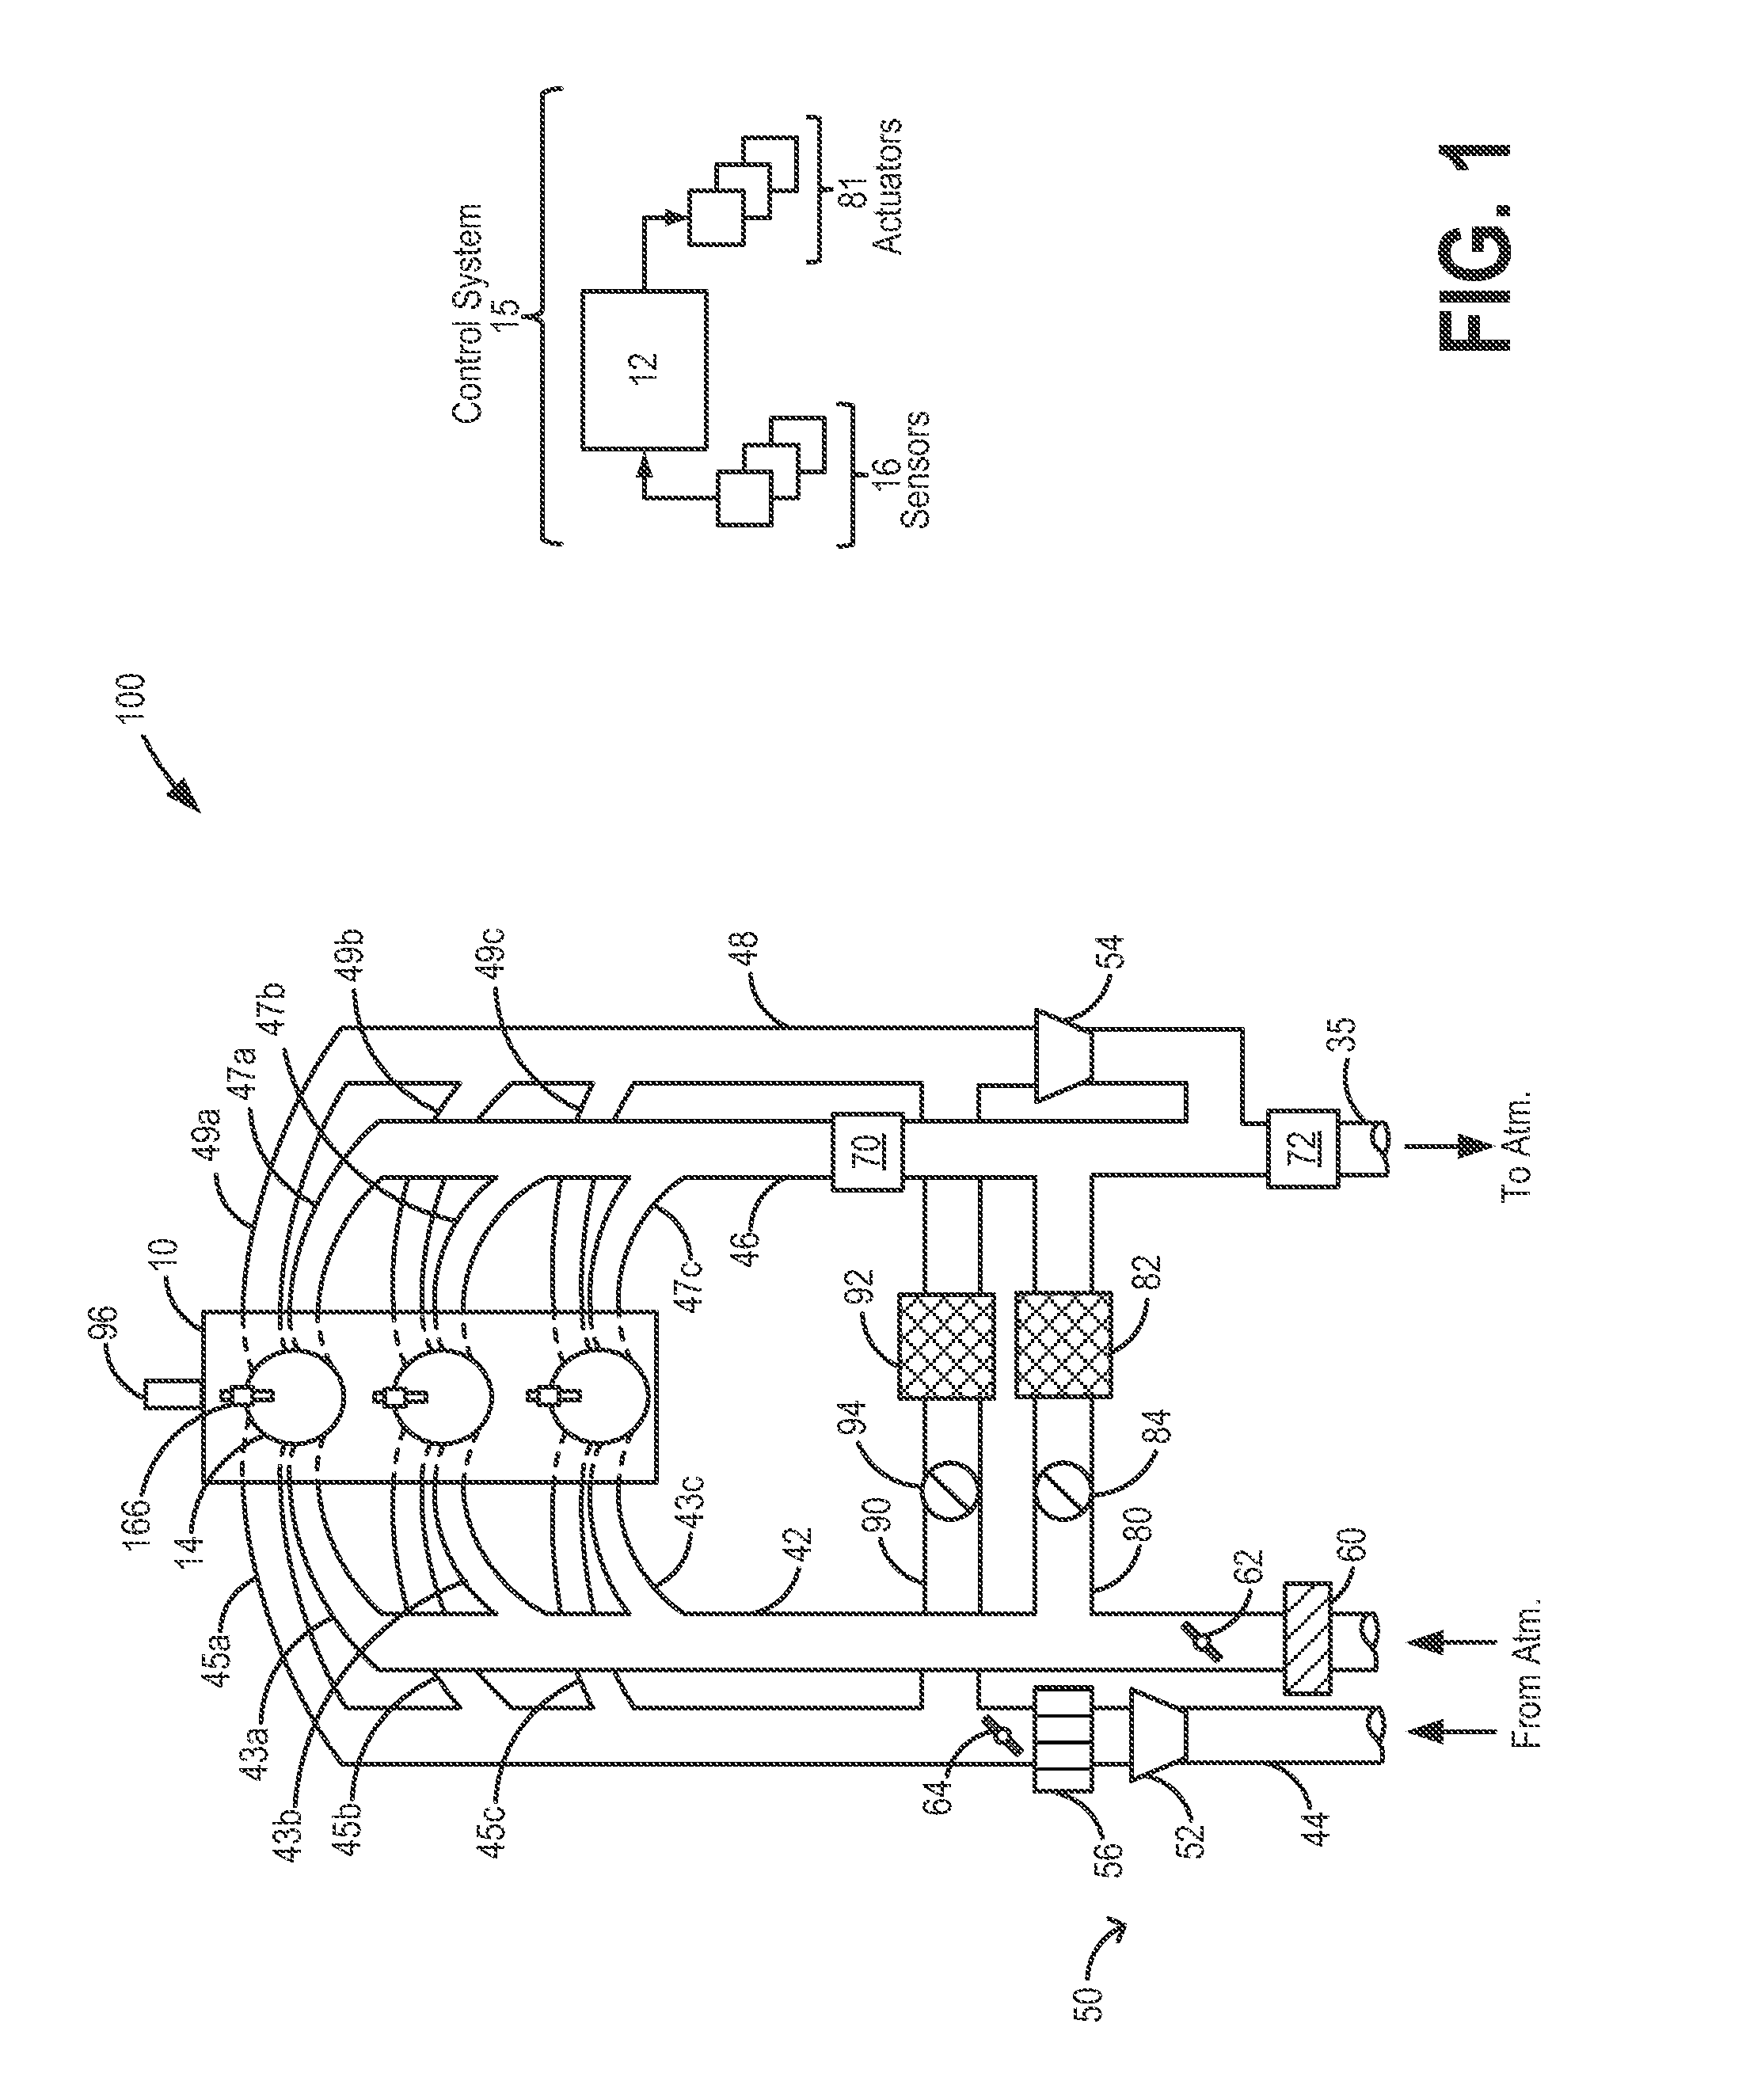 Method and system for a turbocharged engine